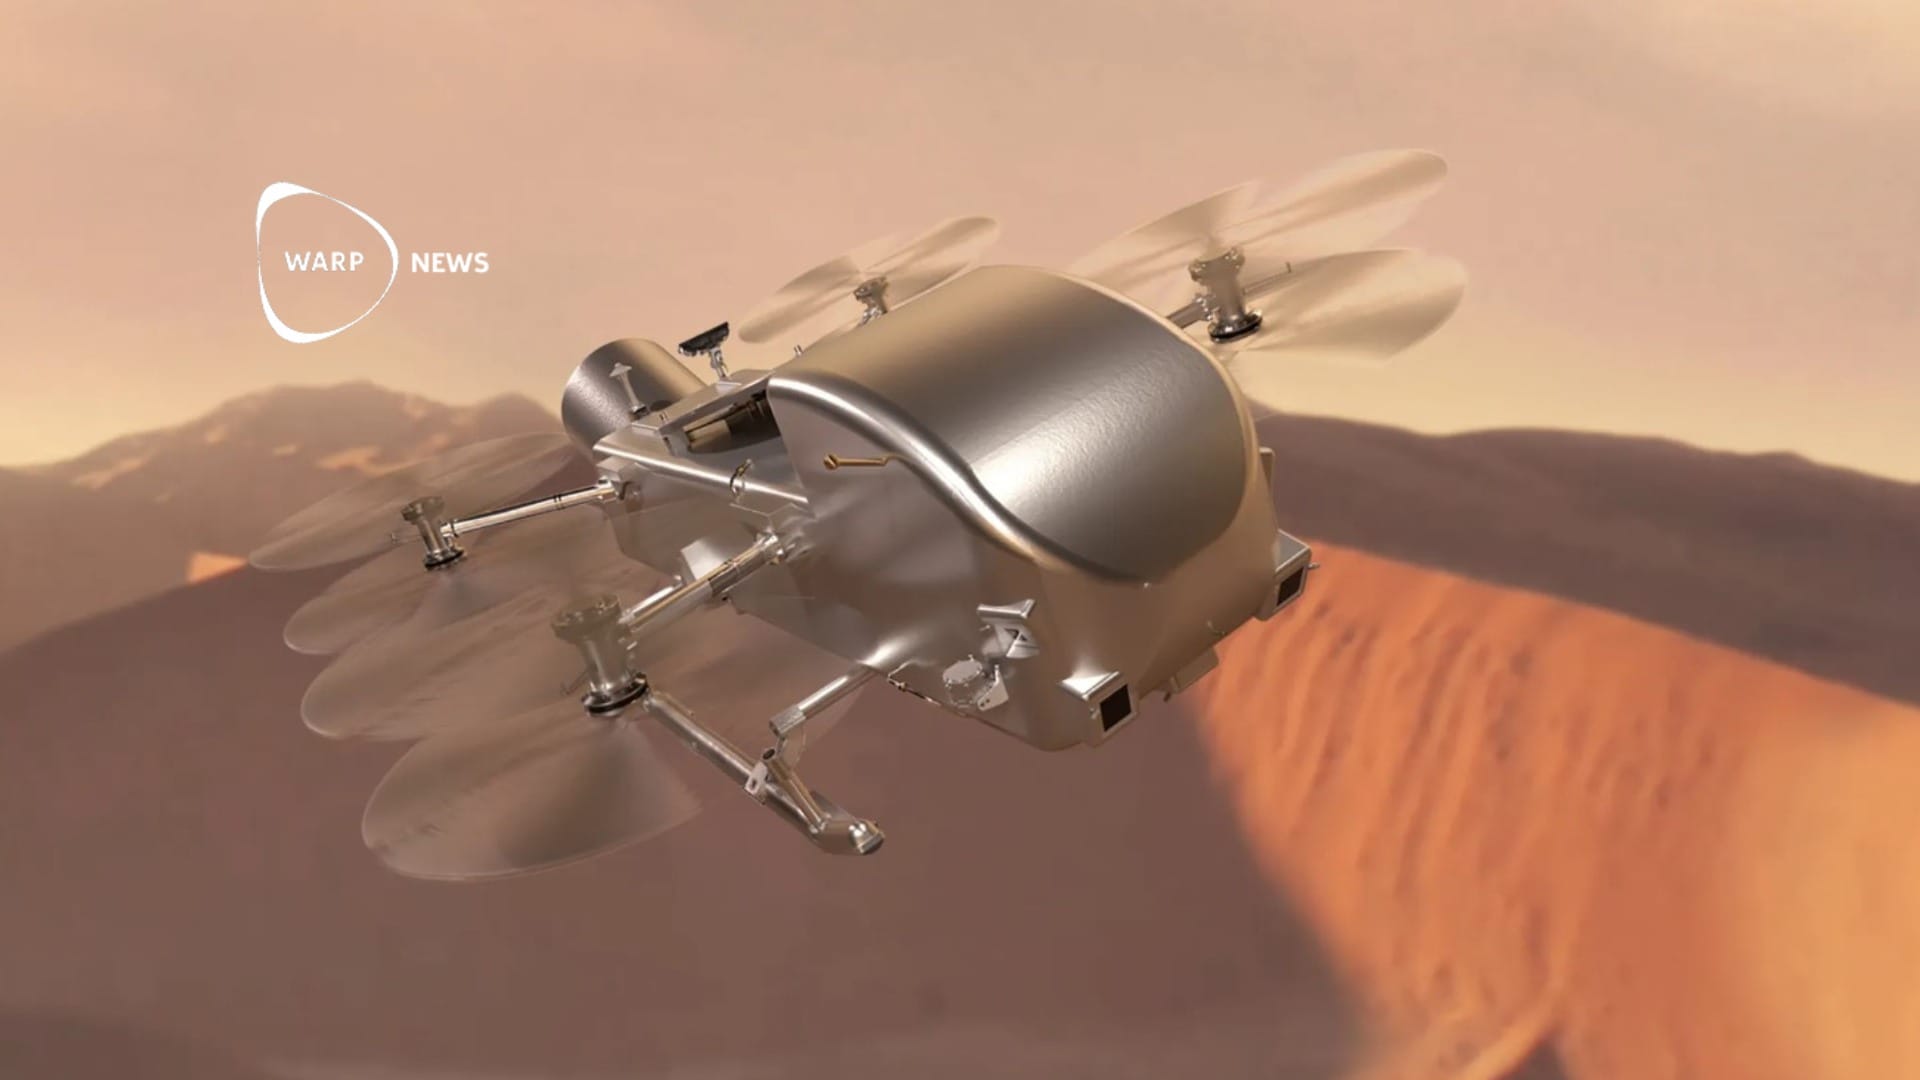 🚁 Dragonfly to explore the fascinating landscape of the moon Titan